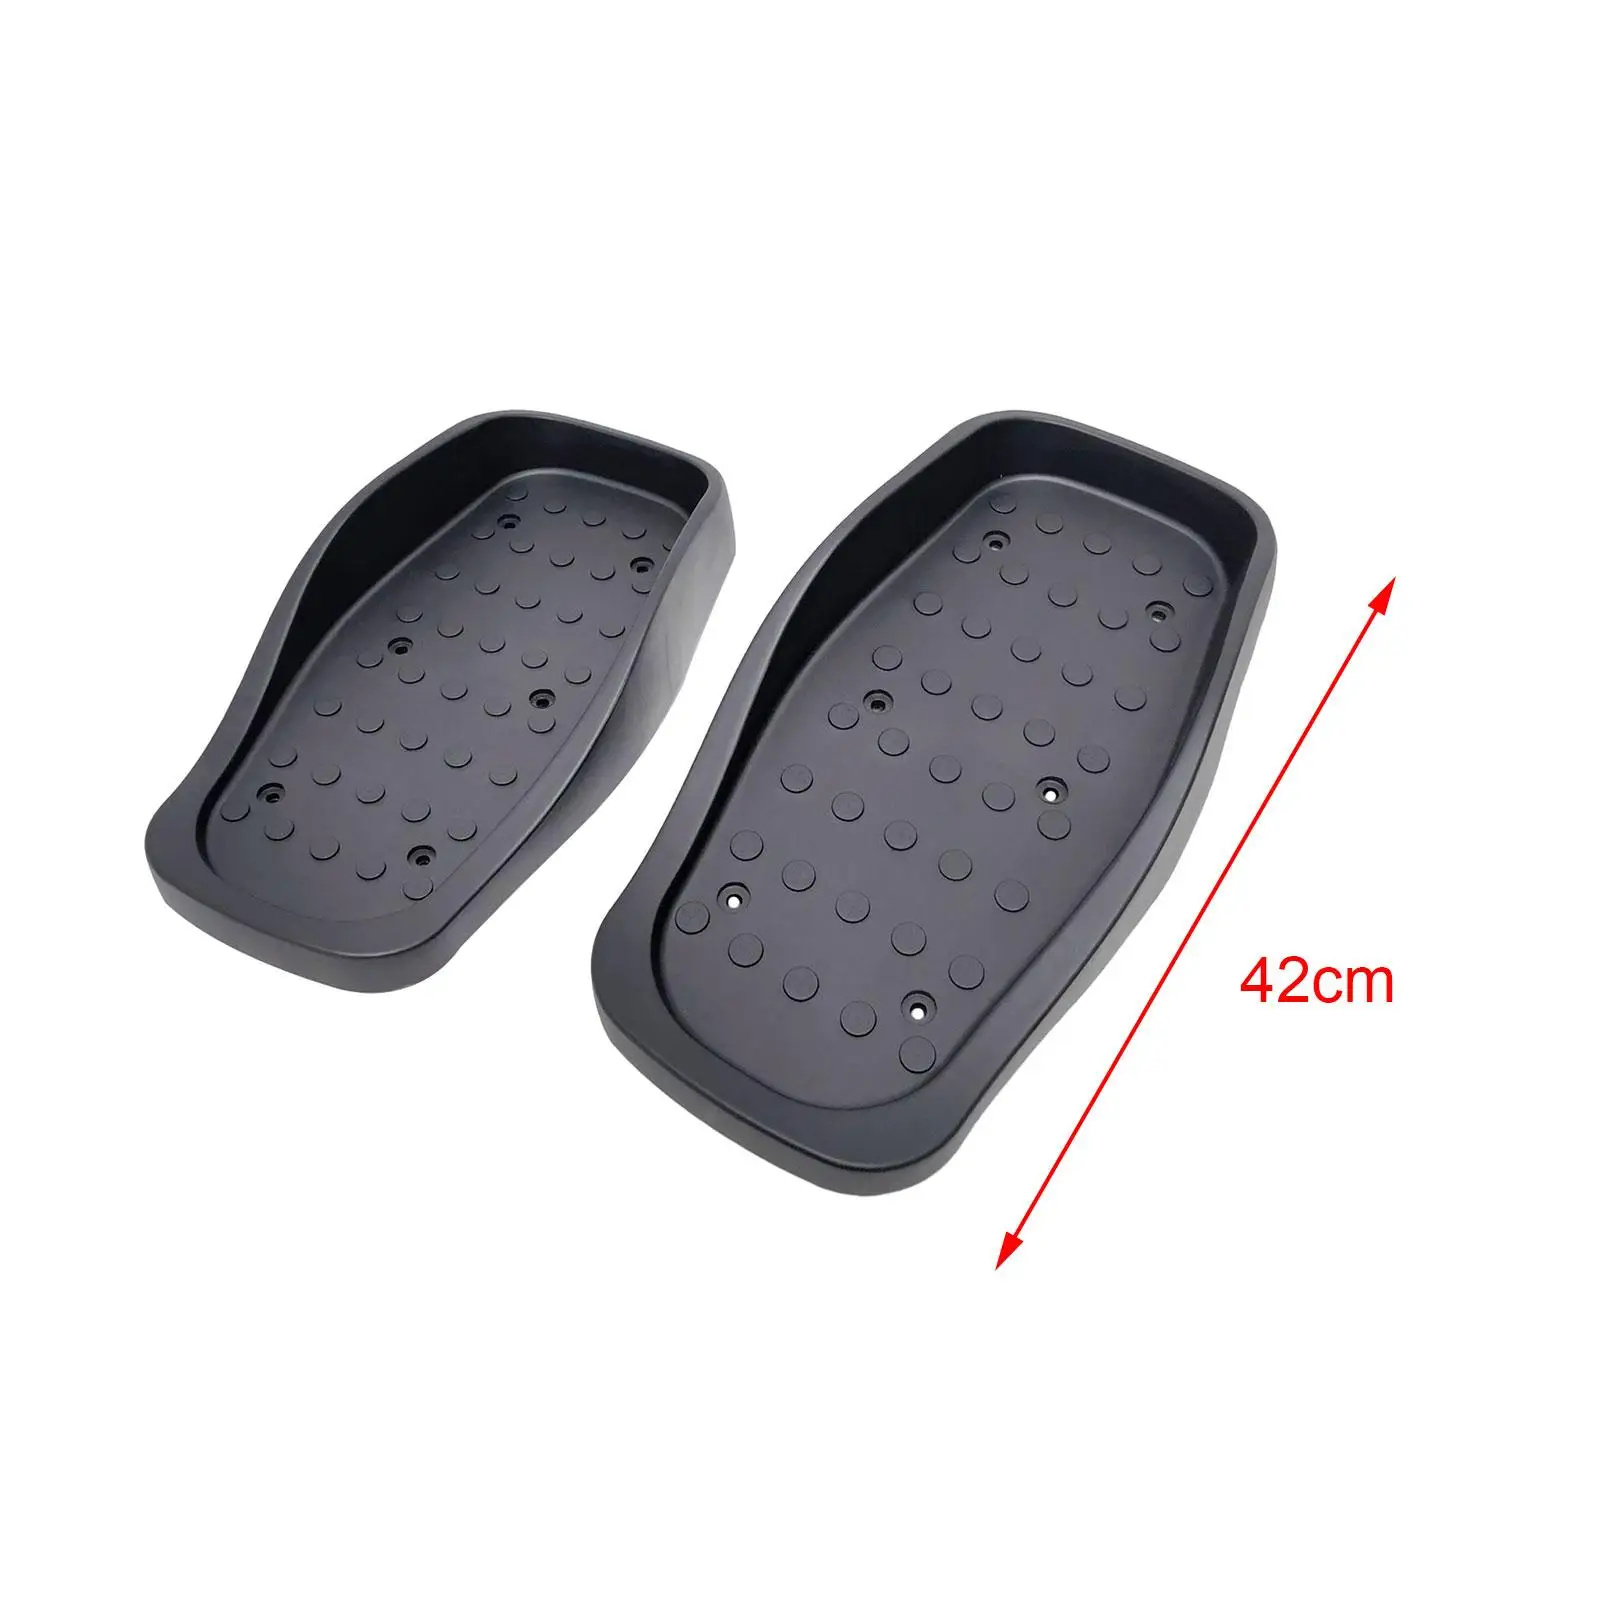 2x Elliptical Machine Pedals Replacement Universal Easy to Install Footboard for Exercise Sports Home Use Workout Body Building